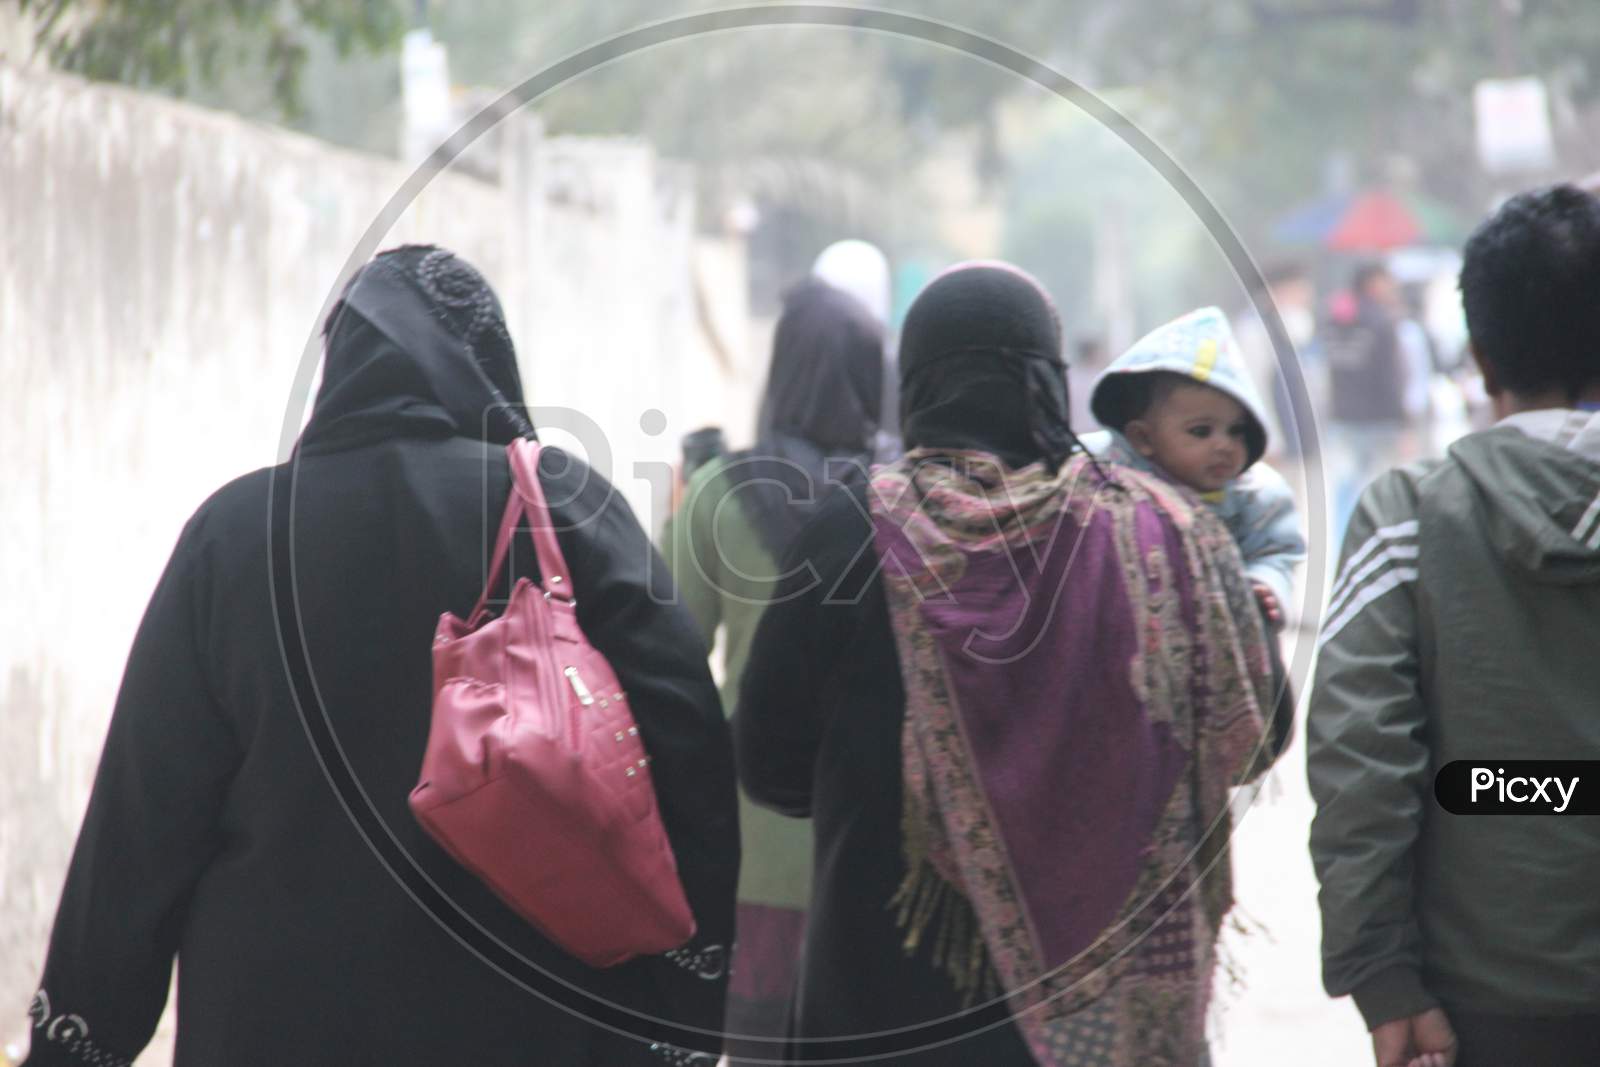 Muslim Woman On The Streets Of Delhi